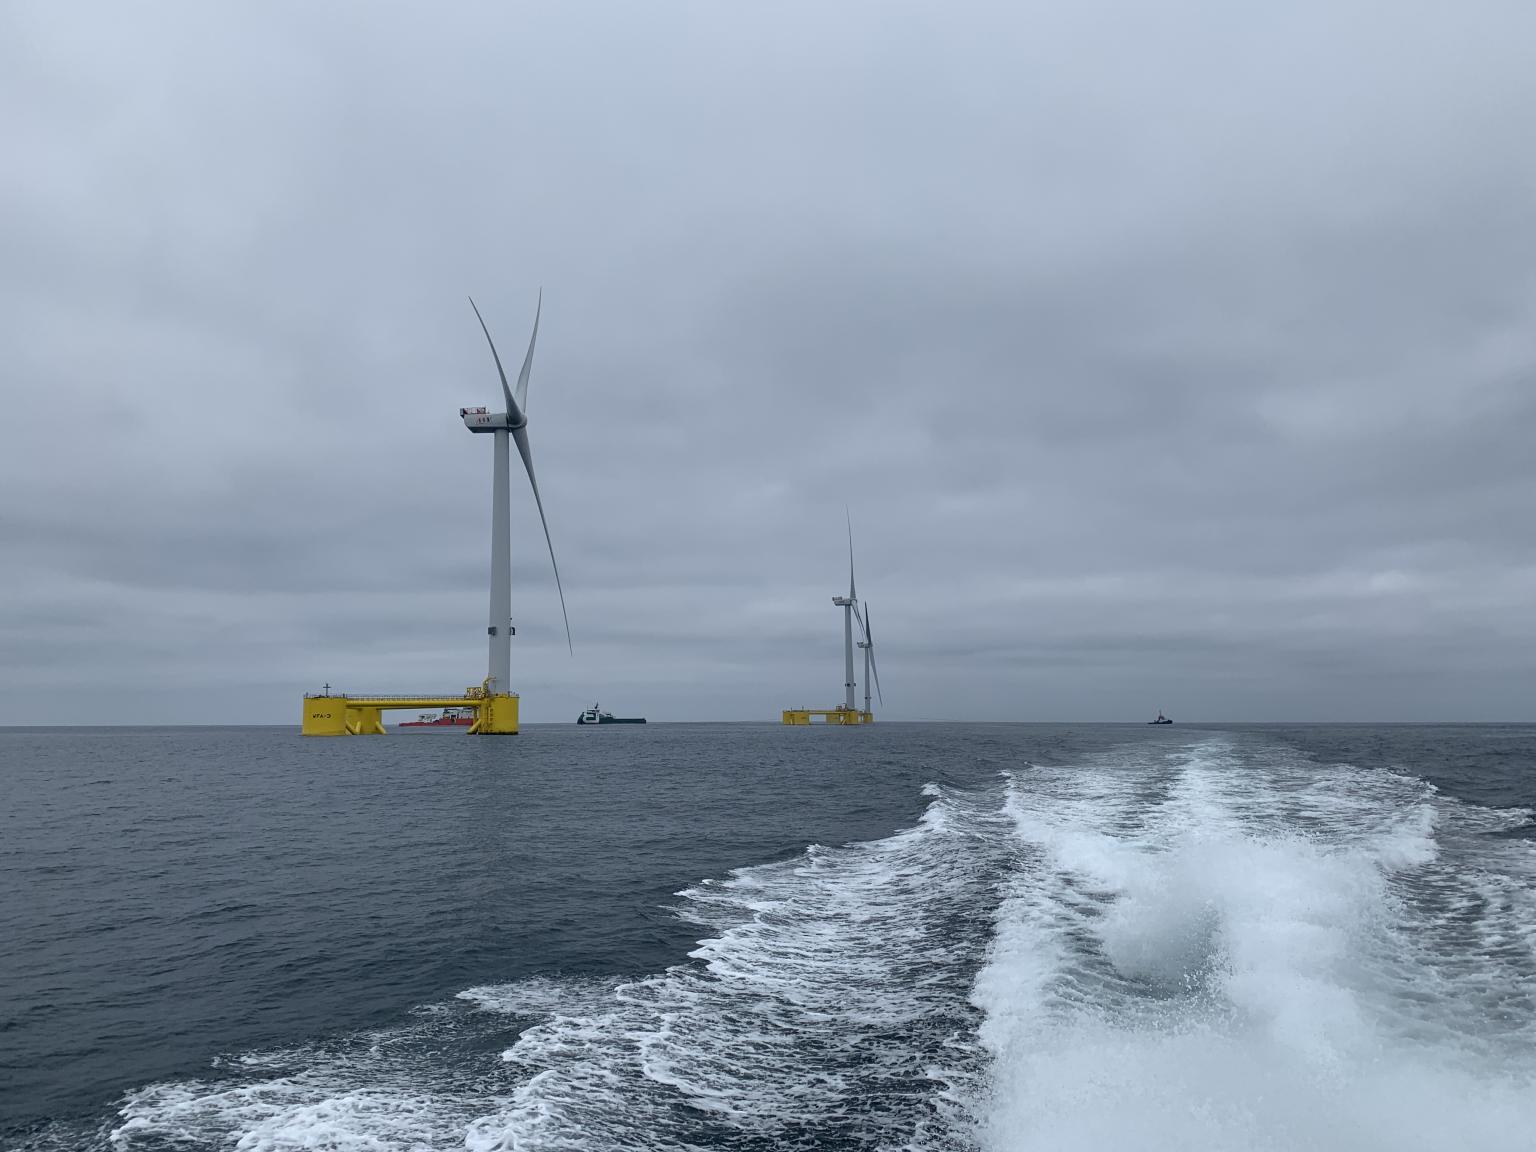 A photo of the WindFloat Atlantic site with all three turbines in place